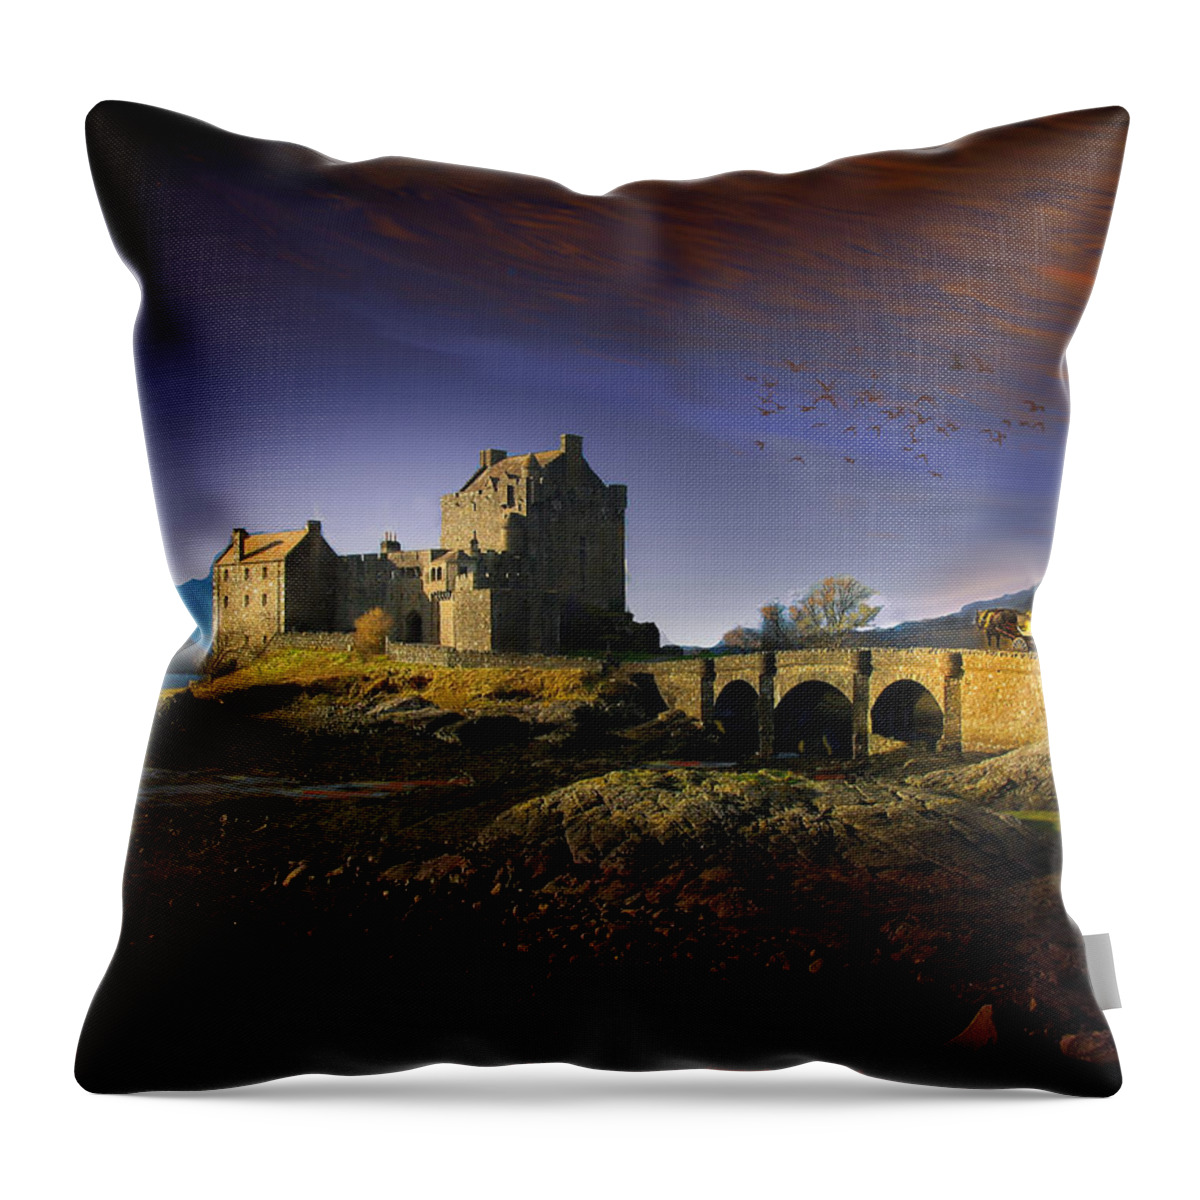 Scotland Throw Pillow featuring the digital art On the Way Home by J Griff Griffin